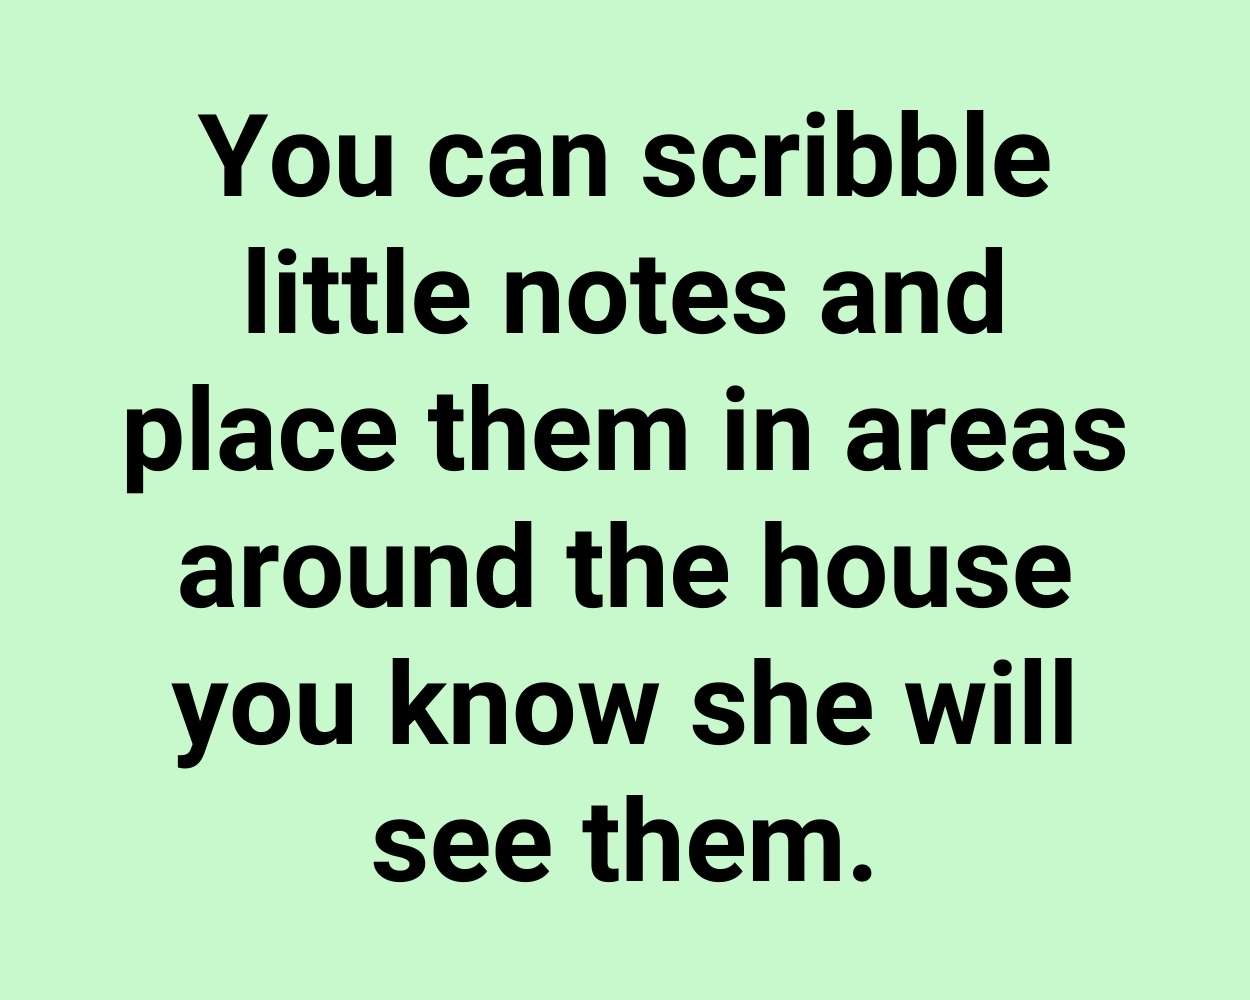 You can scribble little notes and place them in areas around the house you know she will see them.